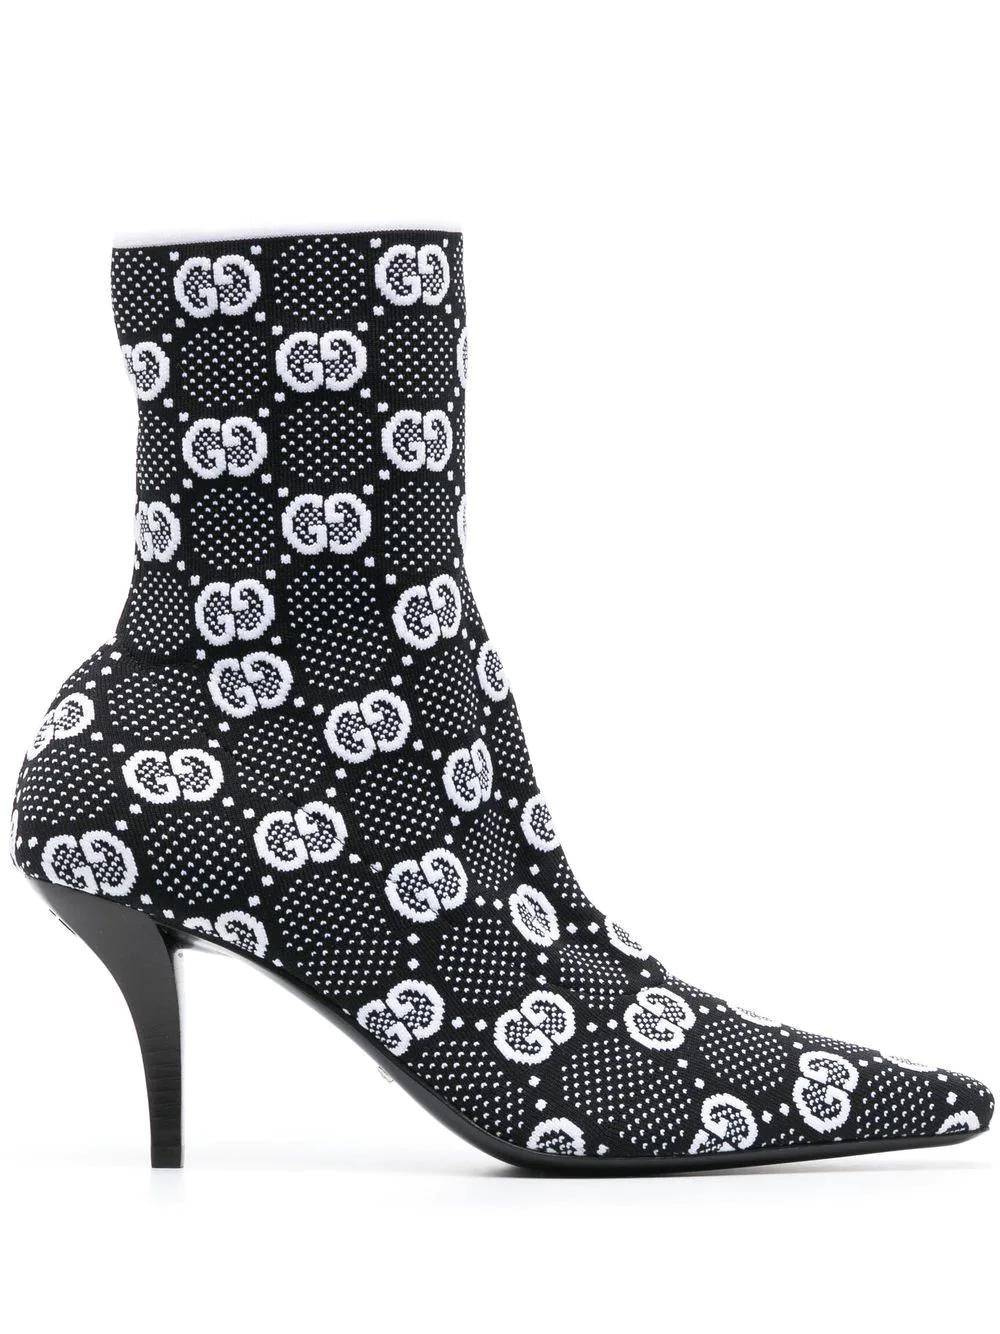 Gucci Black Ankle Boots for Women - SS23 Collection